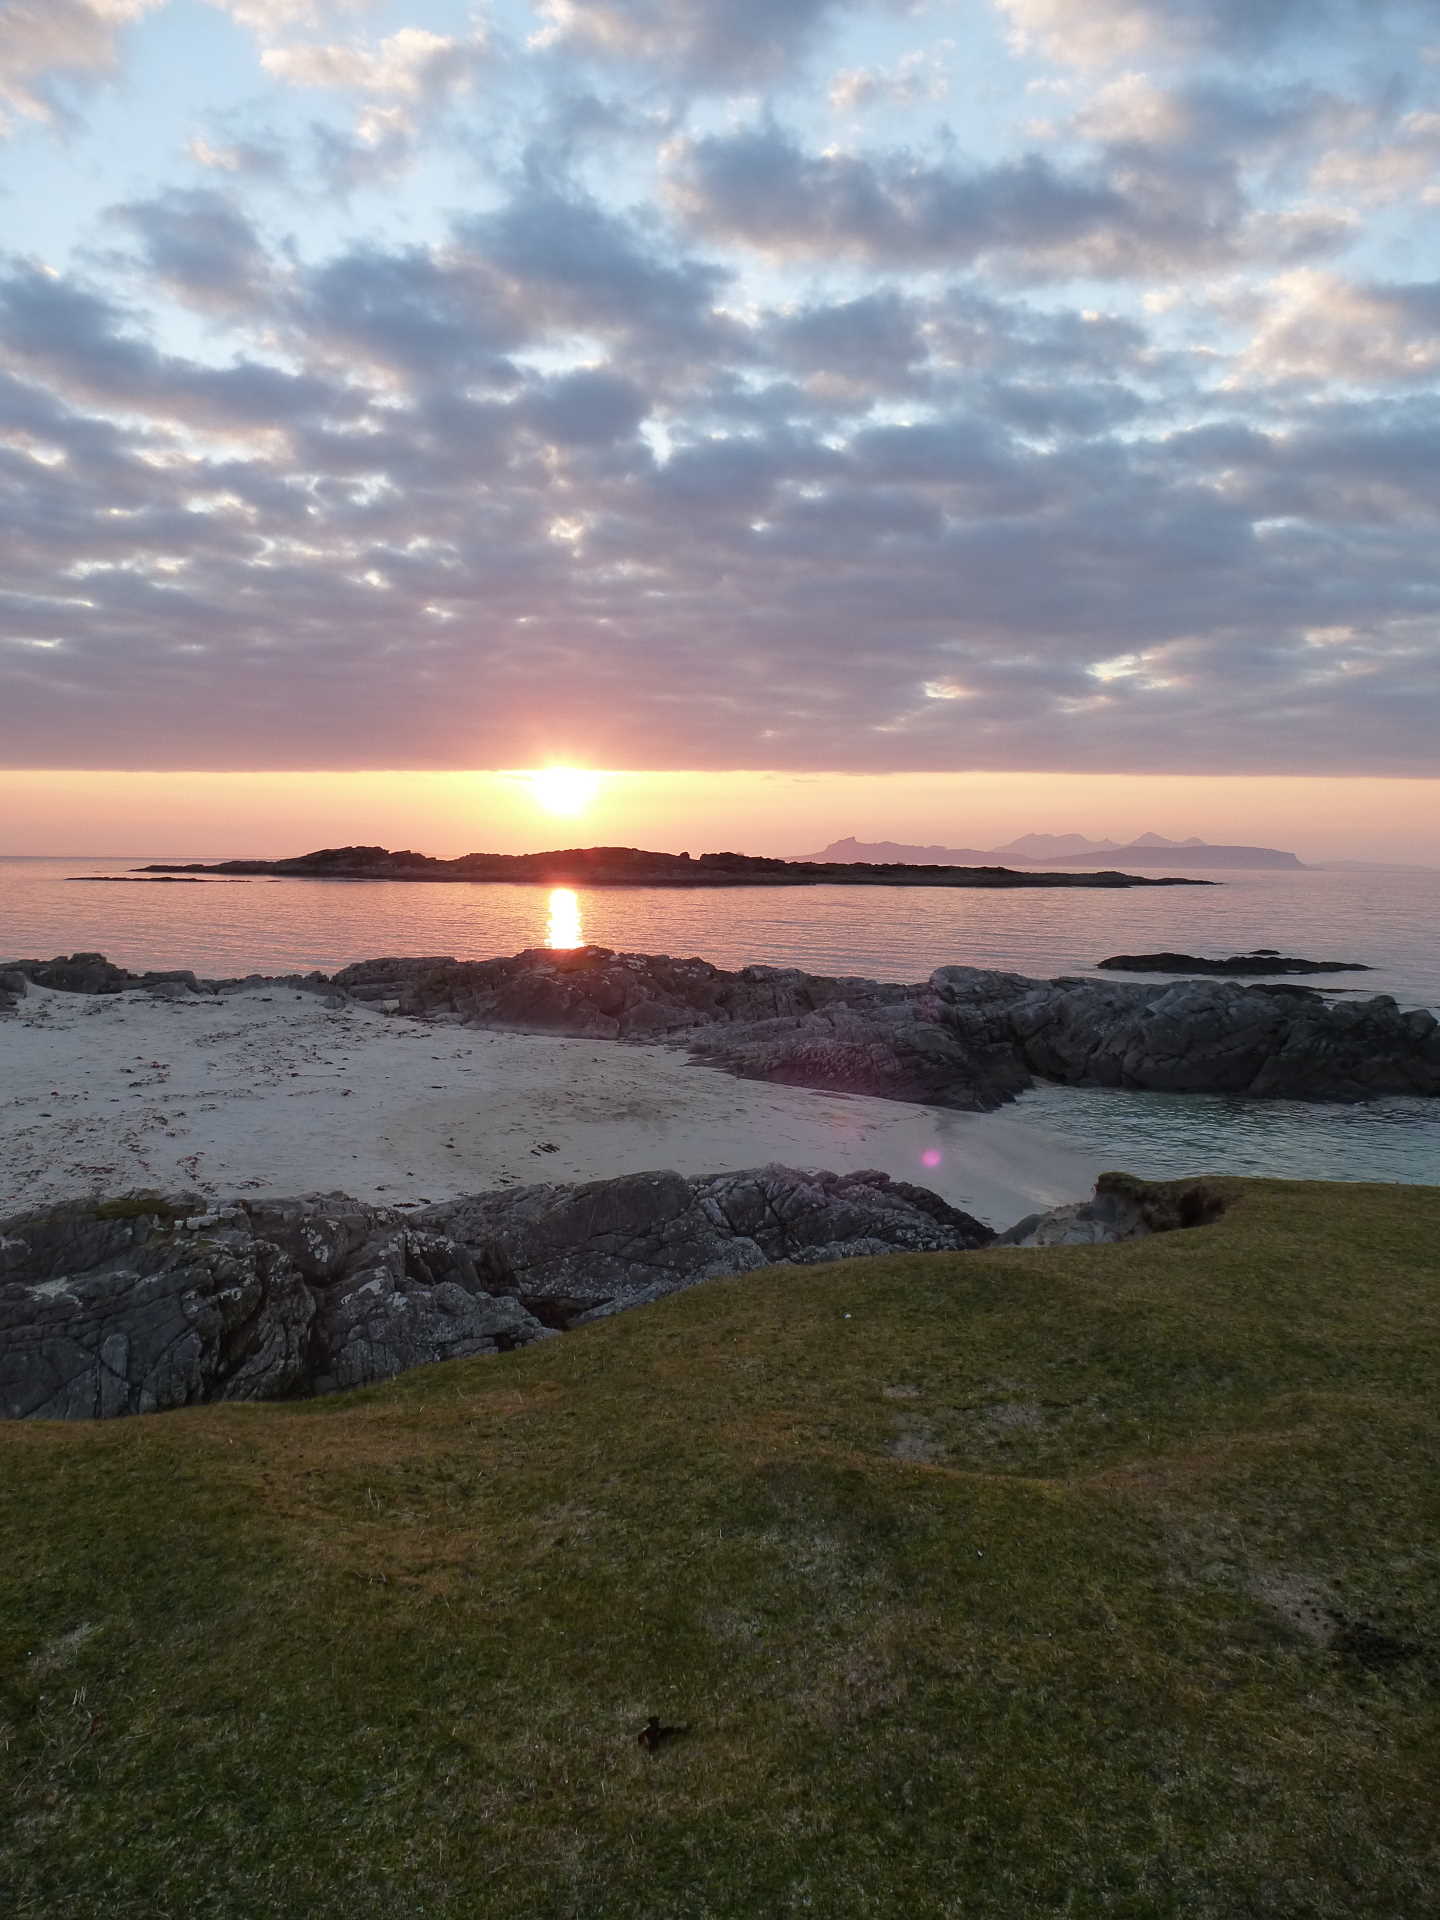 A sunset over the Sound of Arisaig